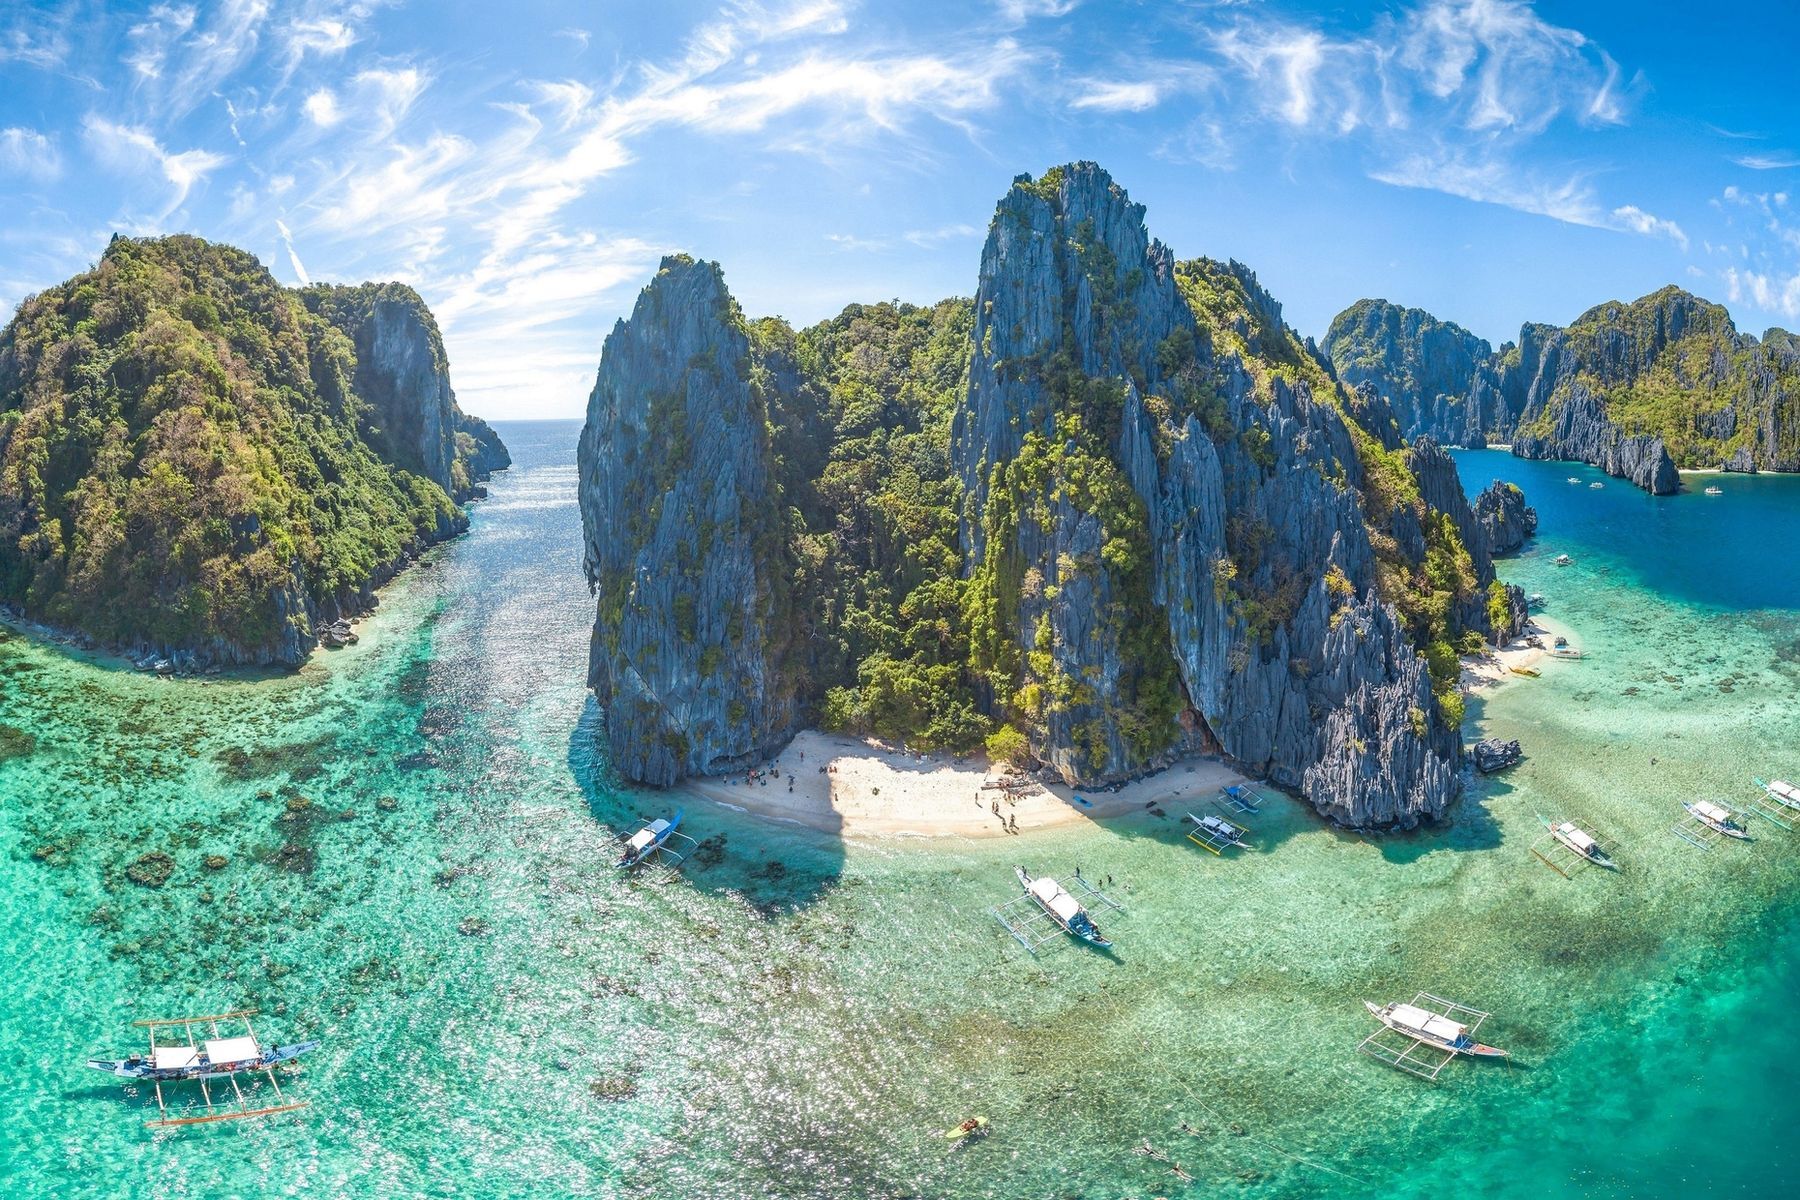 <p>Famous for its incredible karst formations, <a href="https://philippines.travel/destinations/palawan" class="CMY_Link CMY_Valid" rel="noreferrer noopener">Palawan</a> is the largest island in the eponymous Philippines province. Lovers of water sports and secluded beaches will find this island an ideal destination. Visitors can also explore its incredible seabed on a variety of boat trips. Be sure to stop by the Puerto Princesa Subterranean River National Park and the municipality of El Nido to explore Taraw Peak and Nacpan Beach.</p>